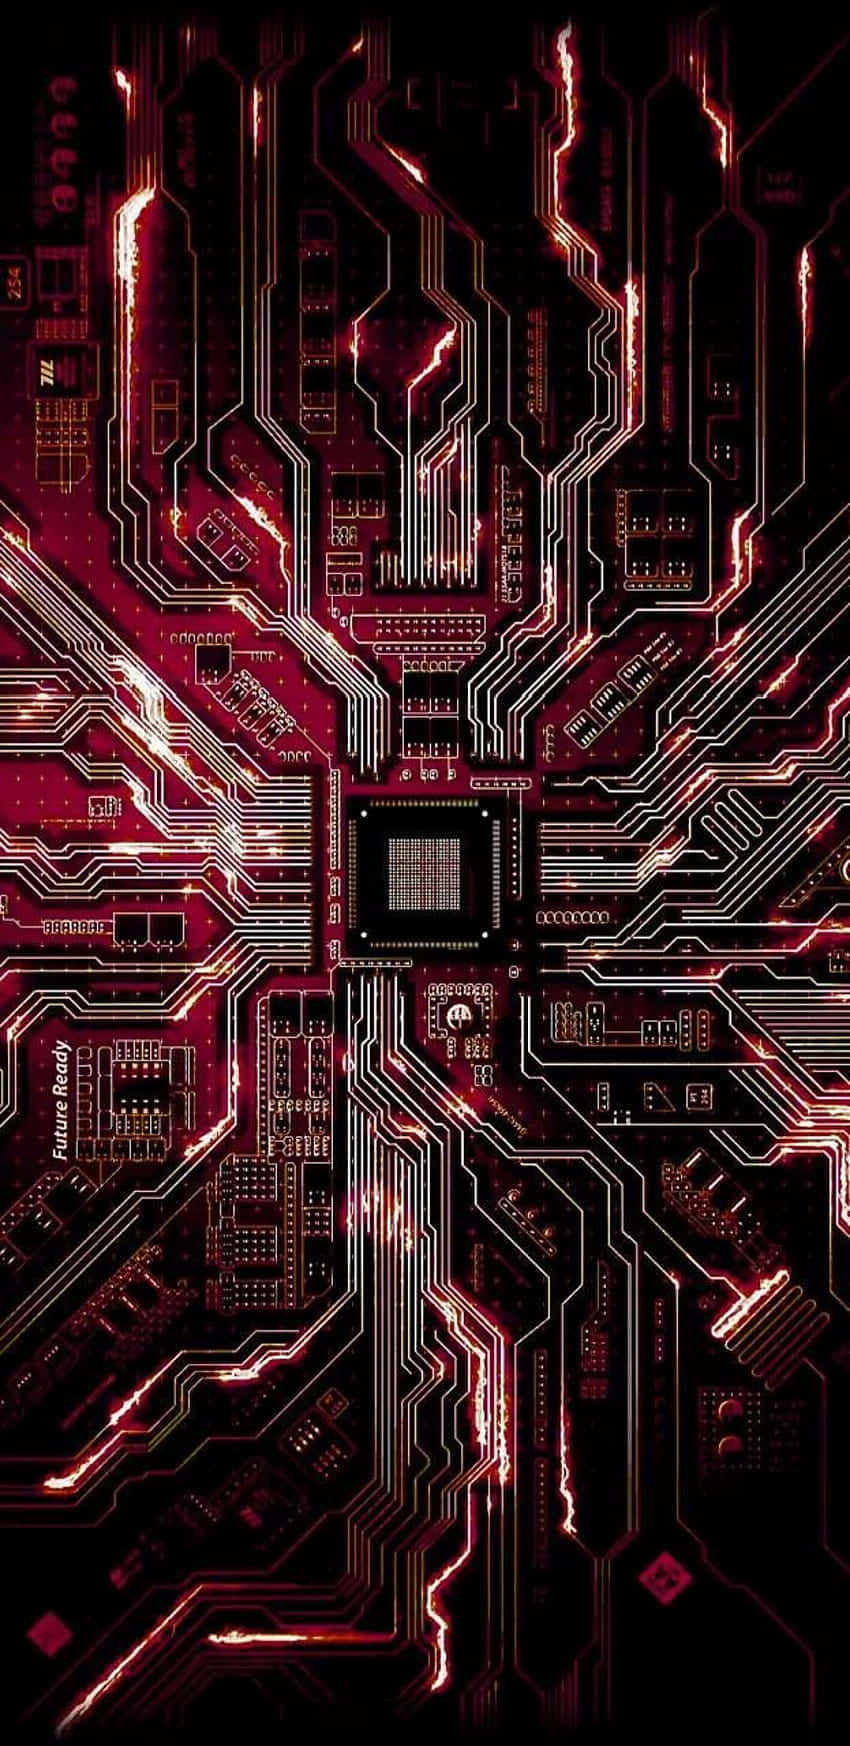 Electronic Circuitry of a Motherboard